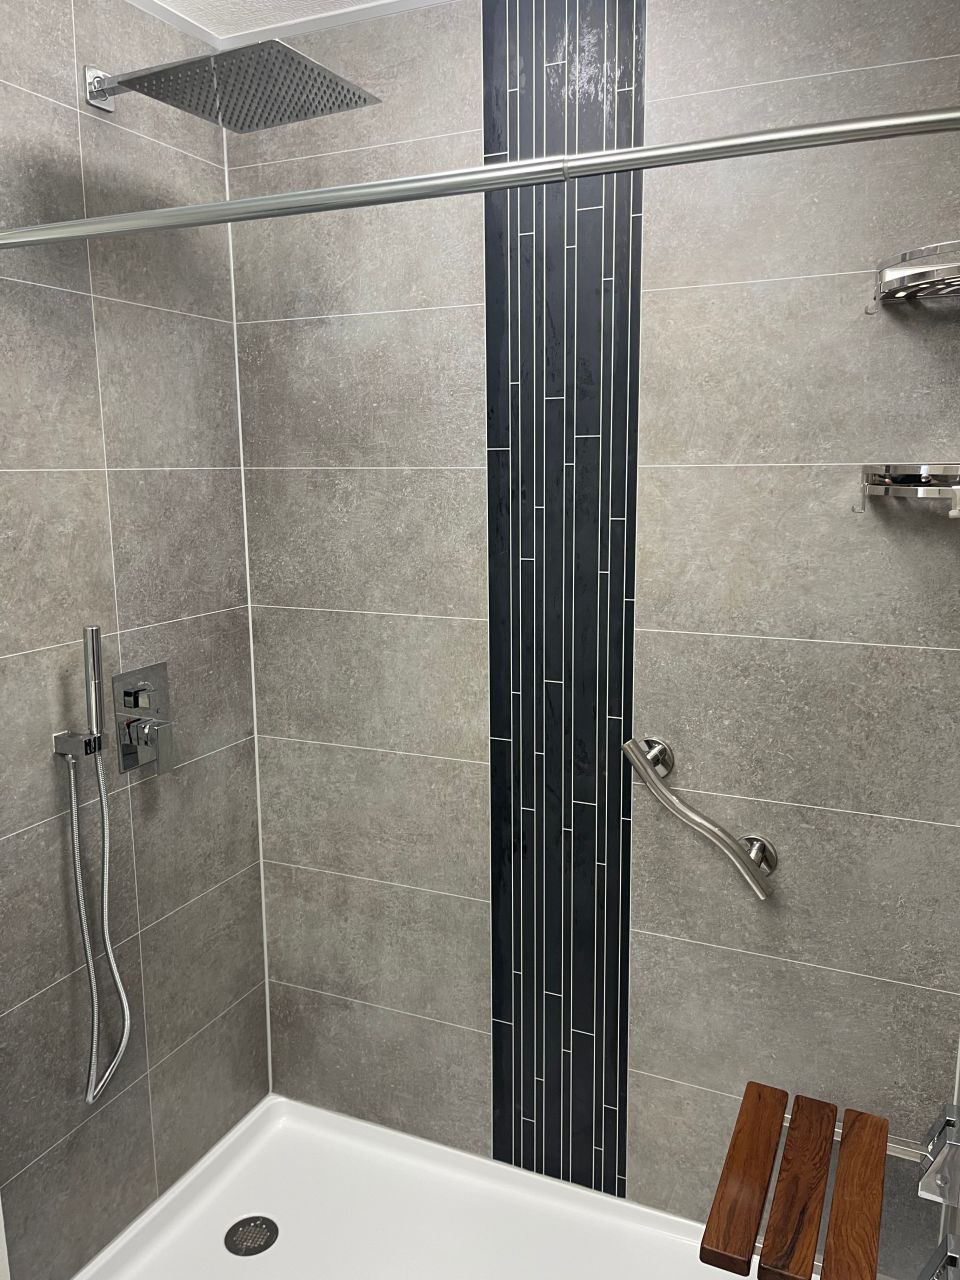 Strategy 3 grout free shower surround laminate wall panels with an accent trim | Innovate Building Solutions #LaminateShowerWallPanels #ShowerWallPanels #ShowerReplacementKit